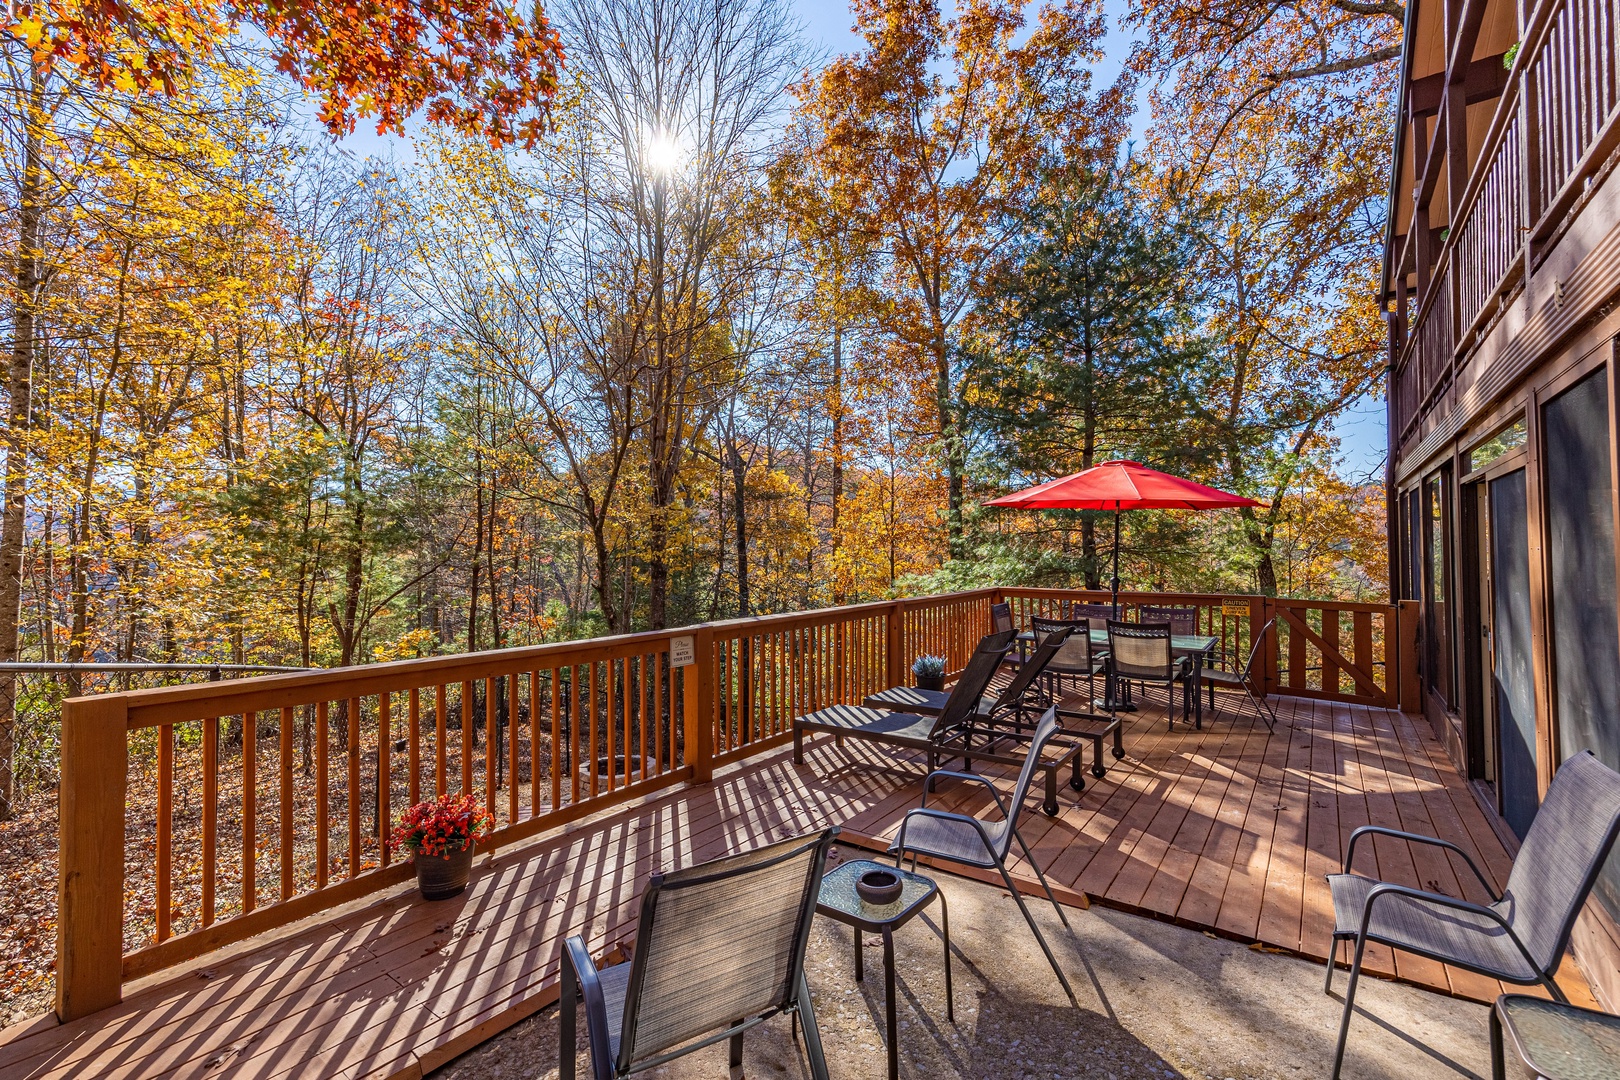 Deck with seating and table at Buena Vista Getaway, a 3 bedroom cabin rental located in gatlinburg